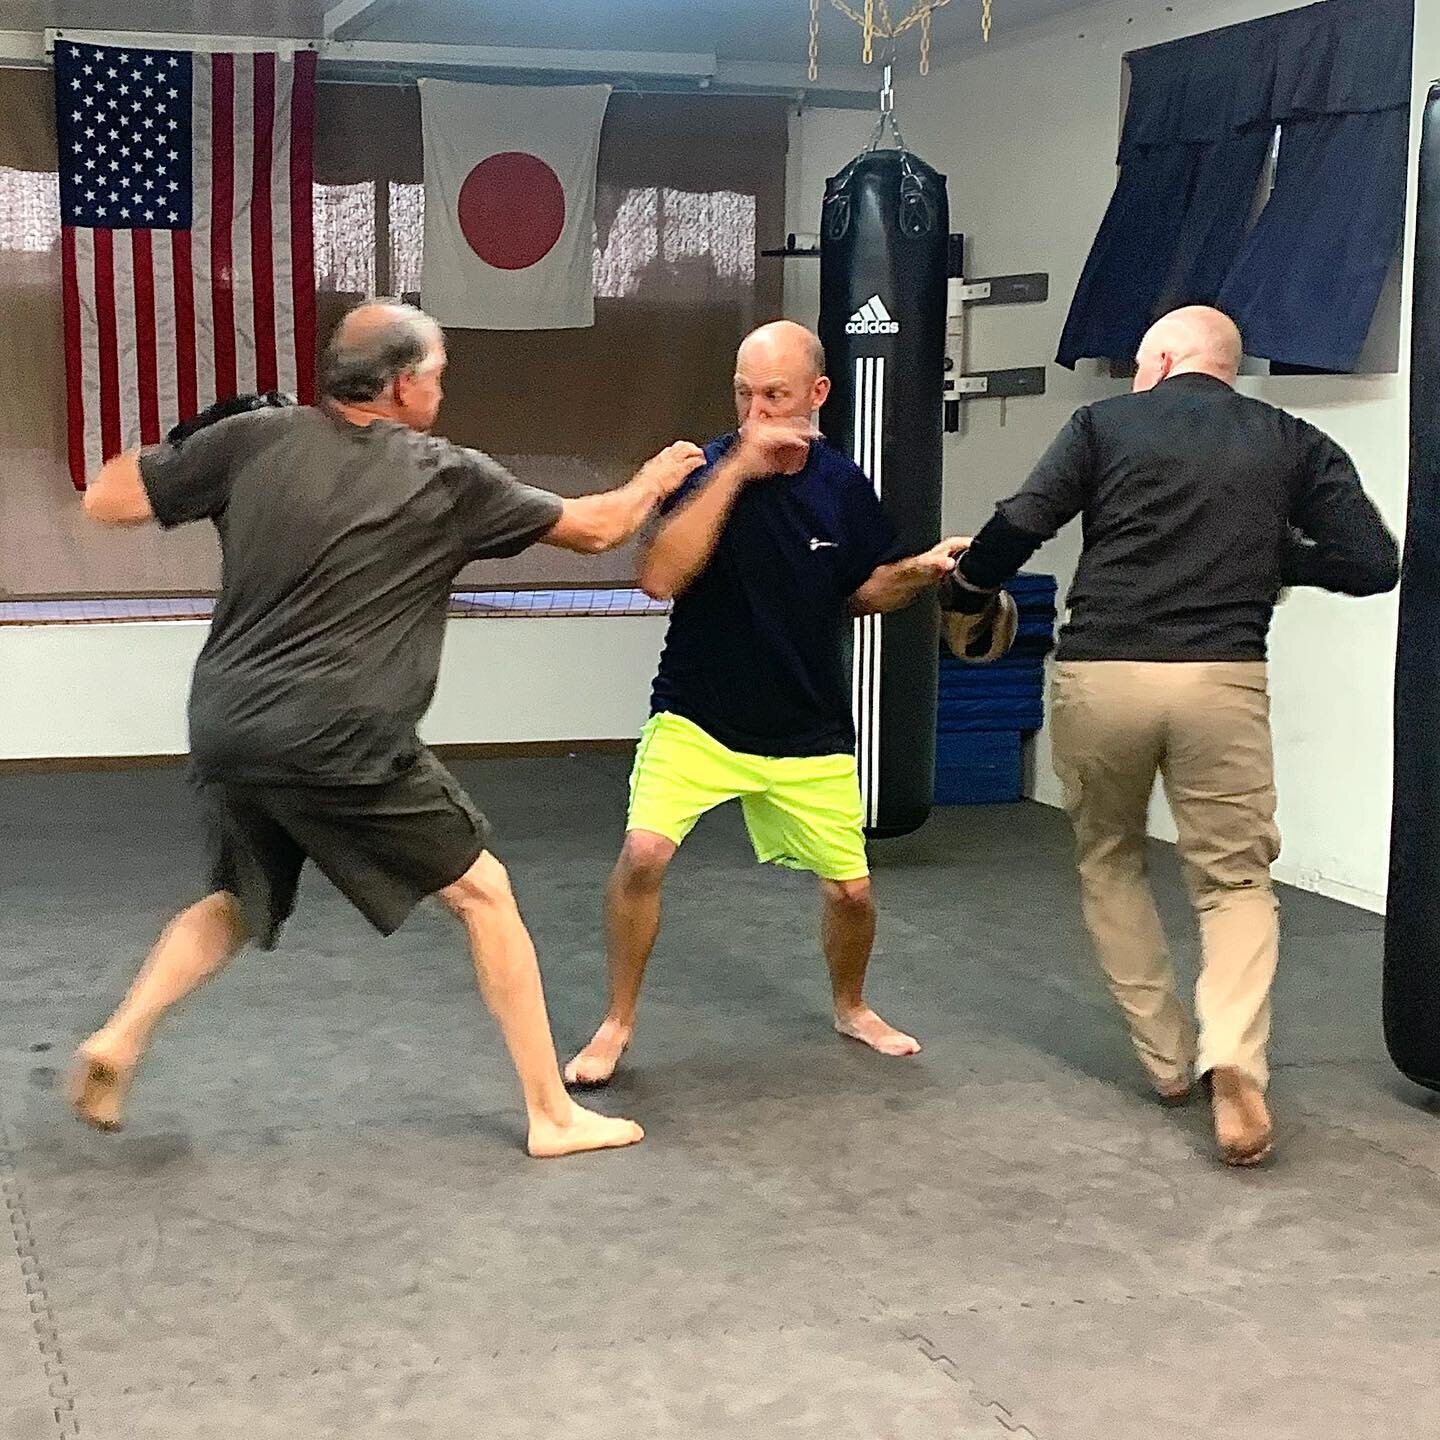 Two on one attacks to practice evasion for our Friday class🥊 

Interested in our classes? Send us a DM or contact us at steelcityselfdefense@gmail.com! 🥊 

#steelcityselfdefense #pueblo #pueblocolorado #puebloshares #selfdefense #selfdefensepueblo 